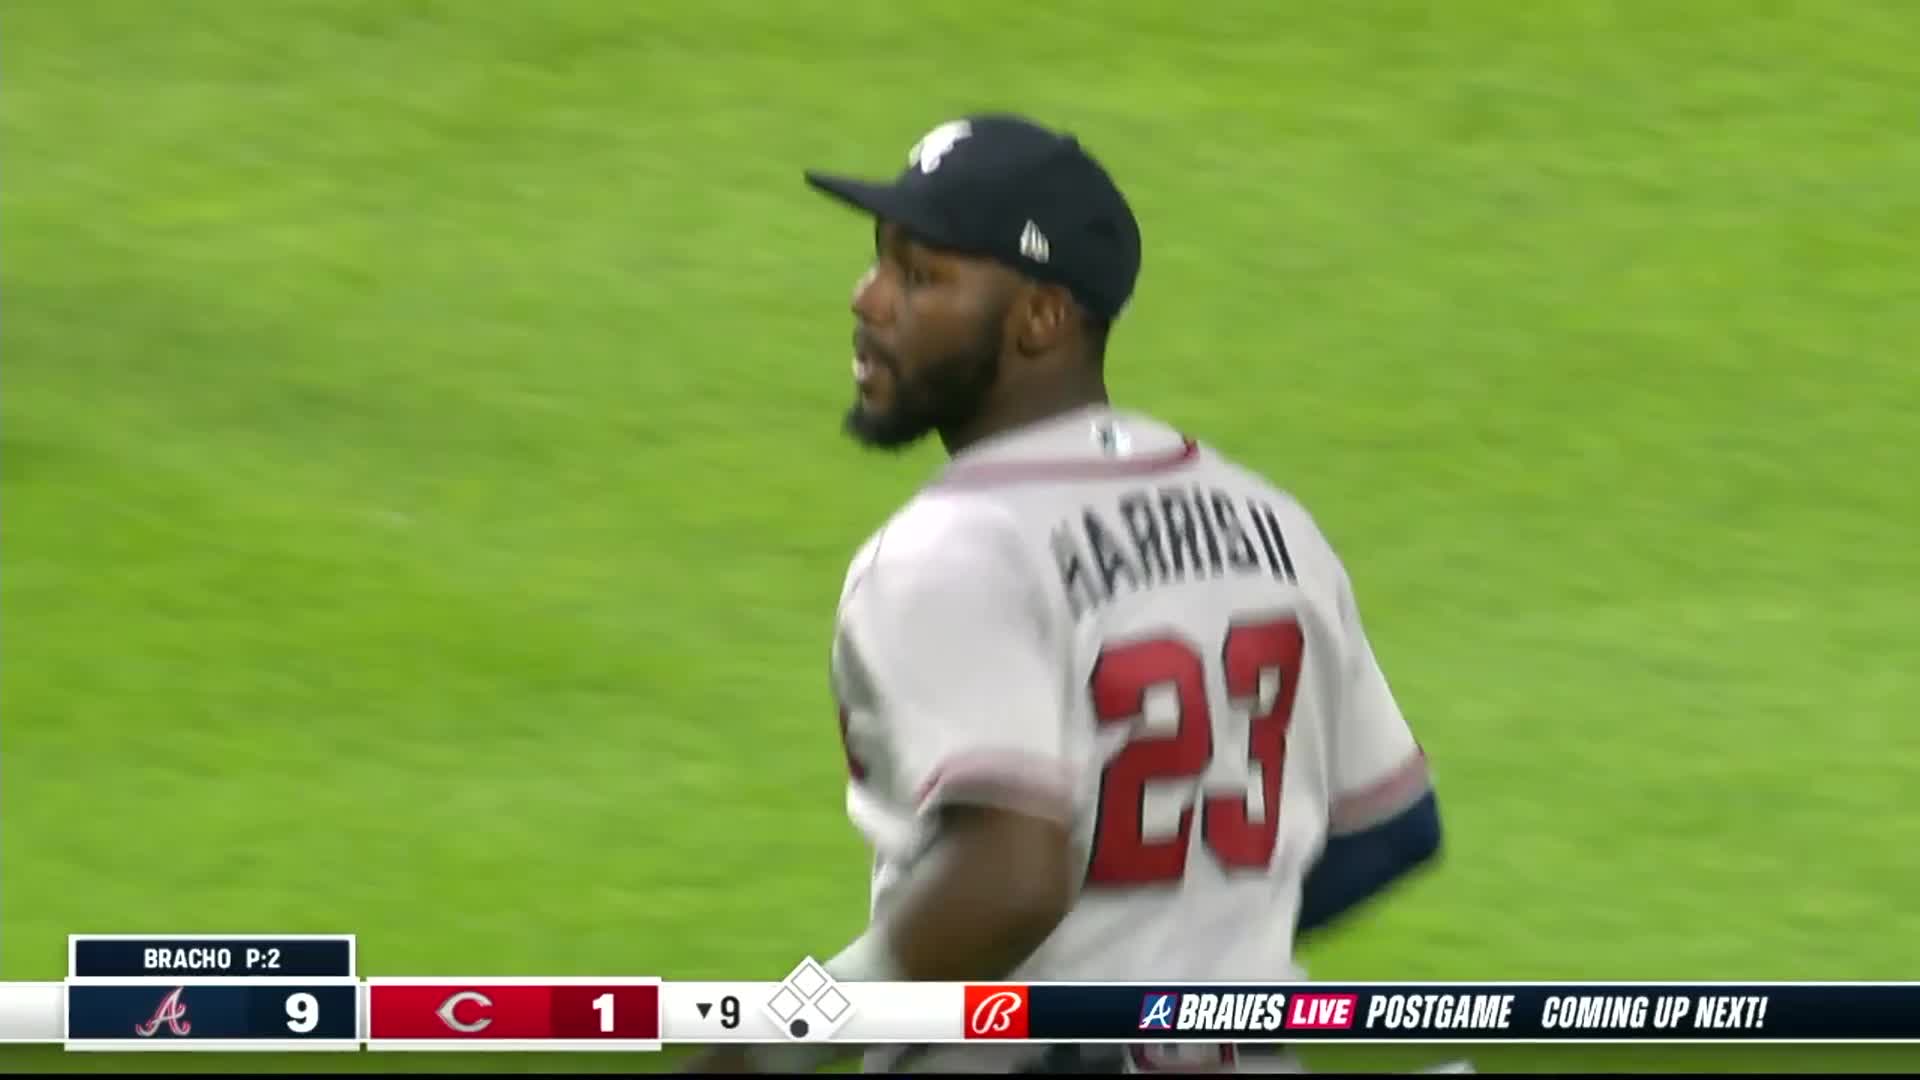 Michael Harris II makes another difficult catch look easy. : r/Braves